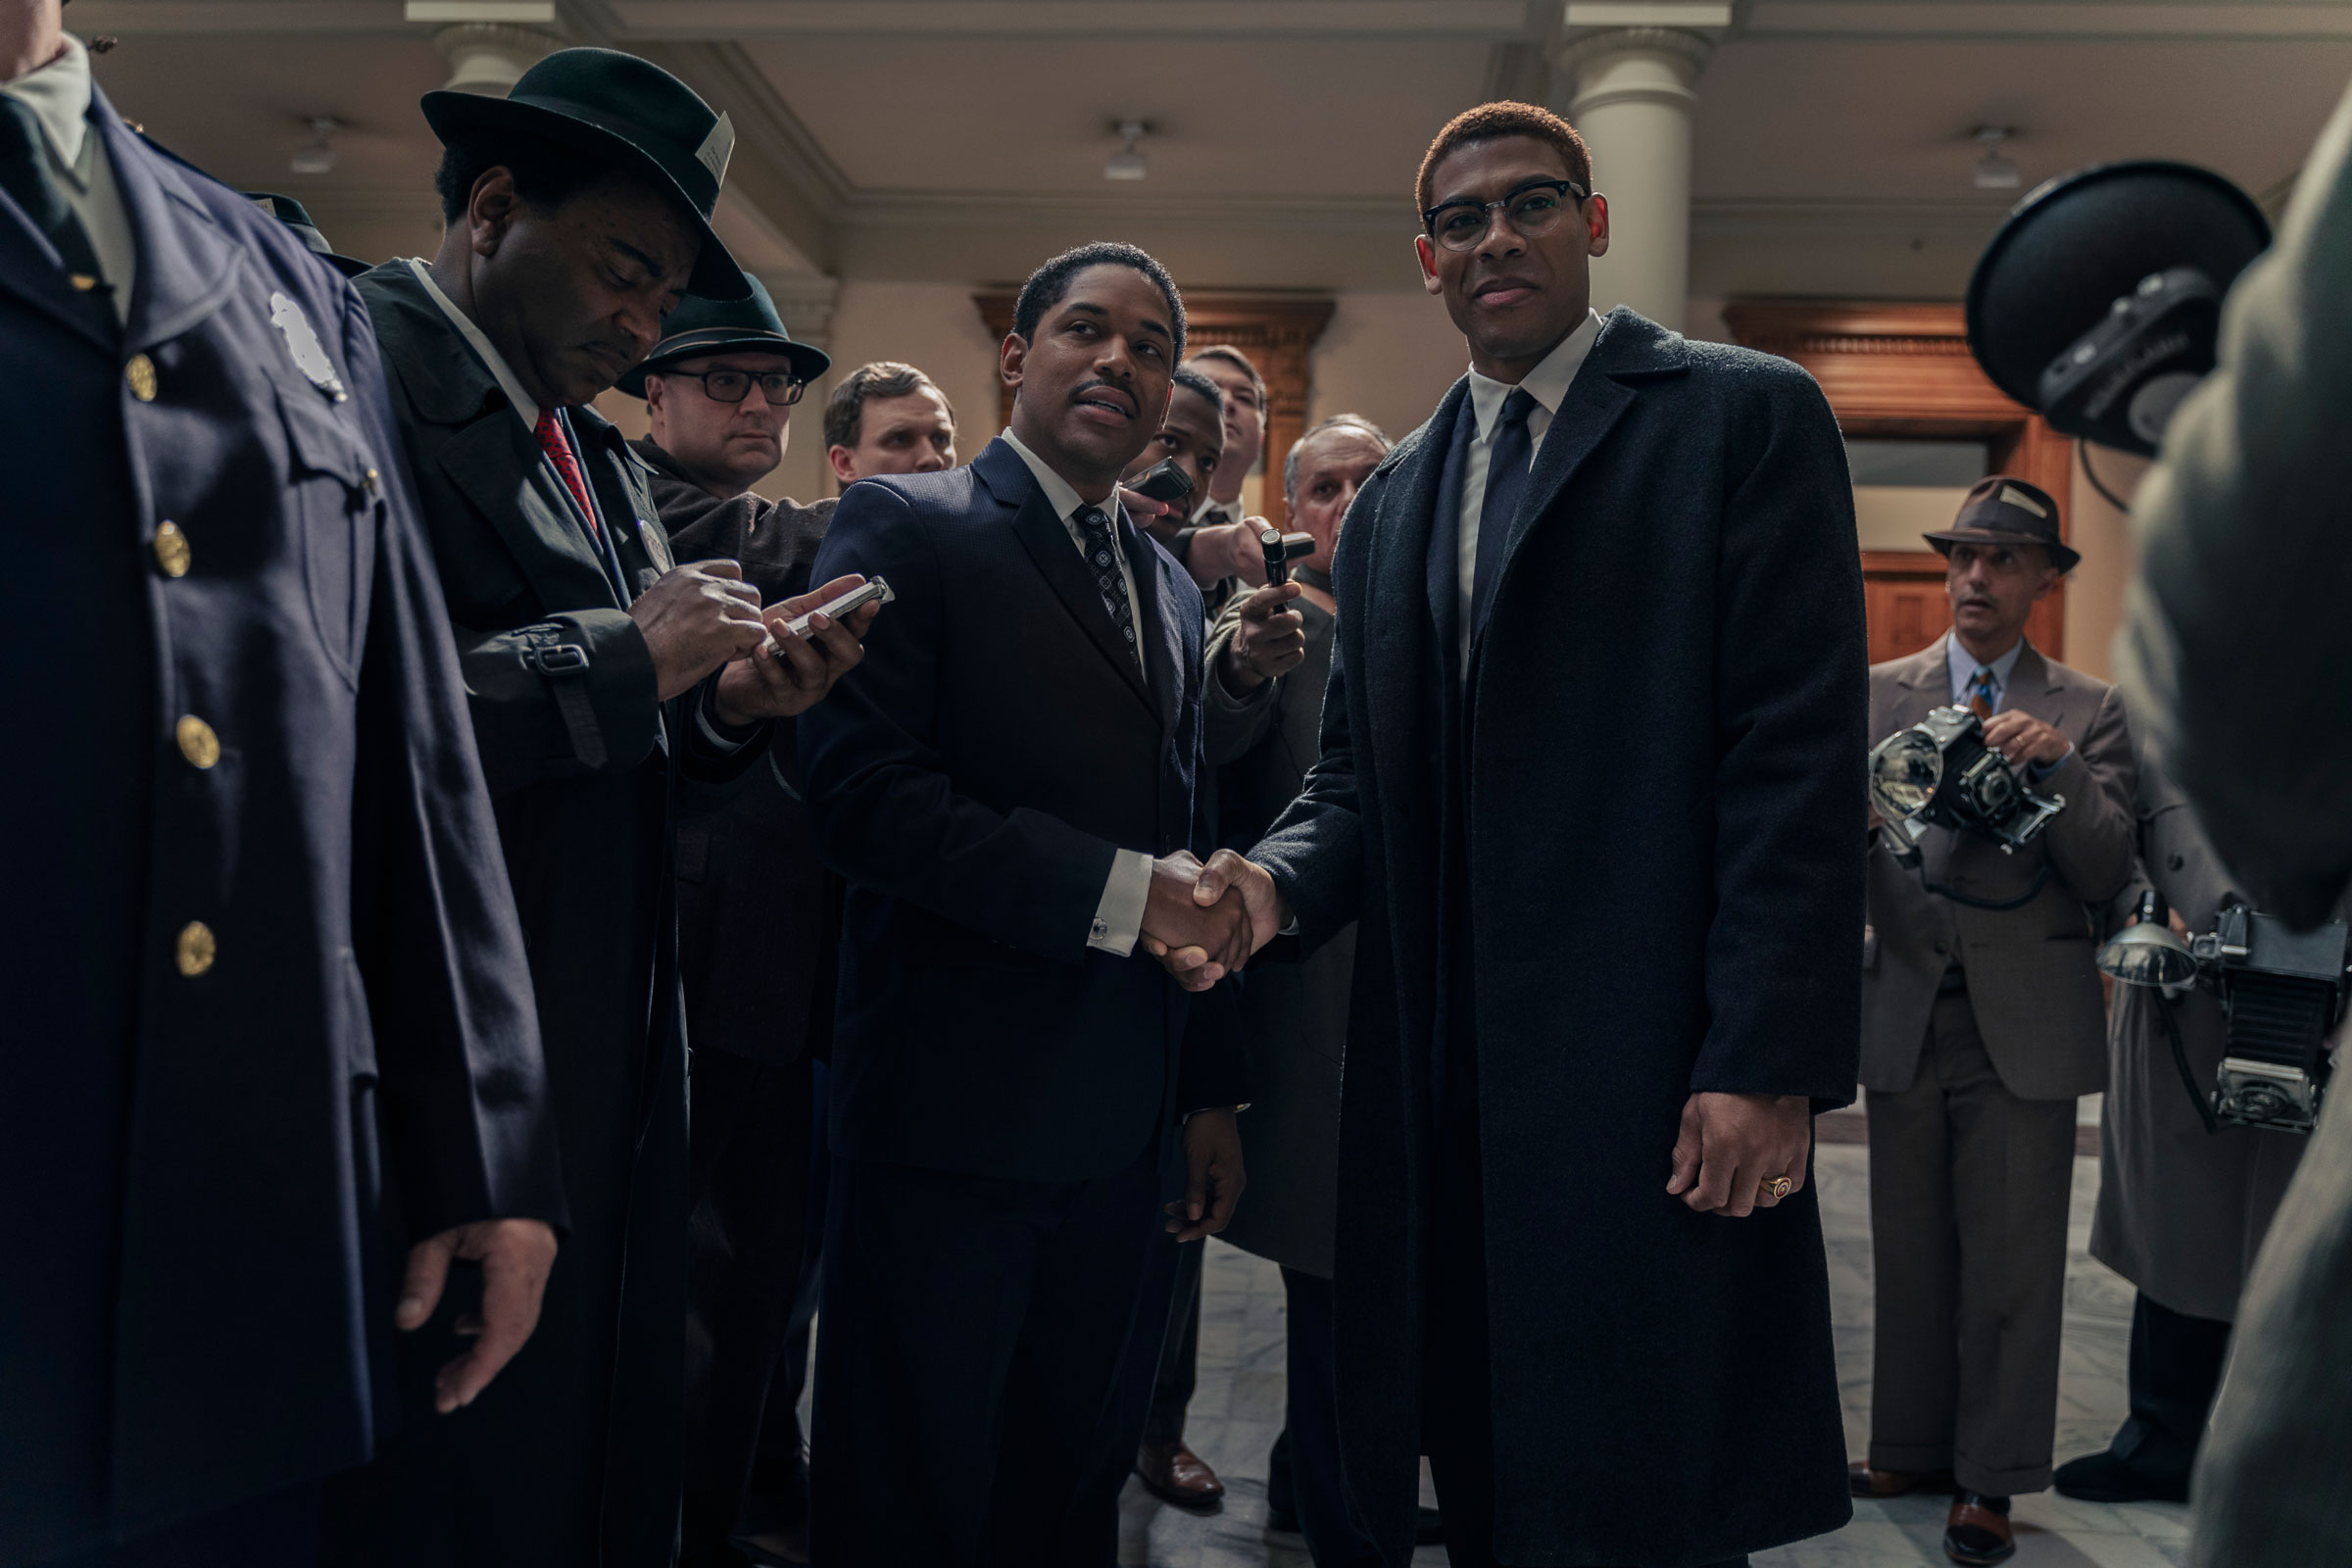 Martin Luther King Jr., played by Kelvin Harrison Jr., and Malcolm X, played by Aaron Pierre, are surrounded by reporters in the US Senate as seen in Genius: MLK/X.